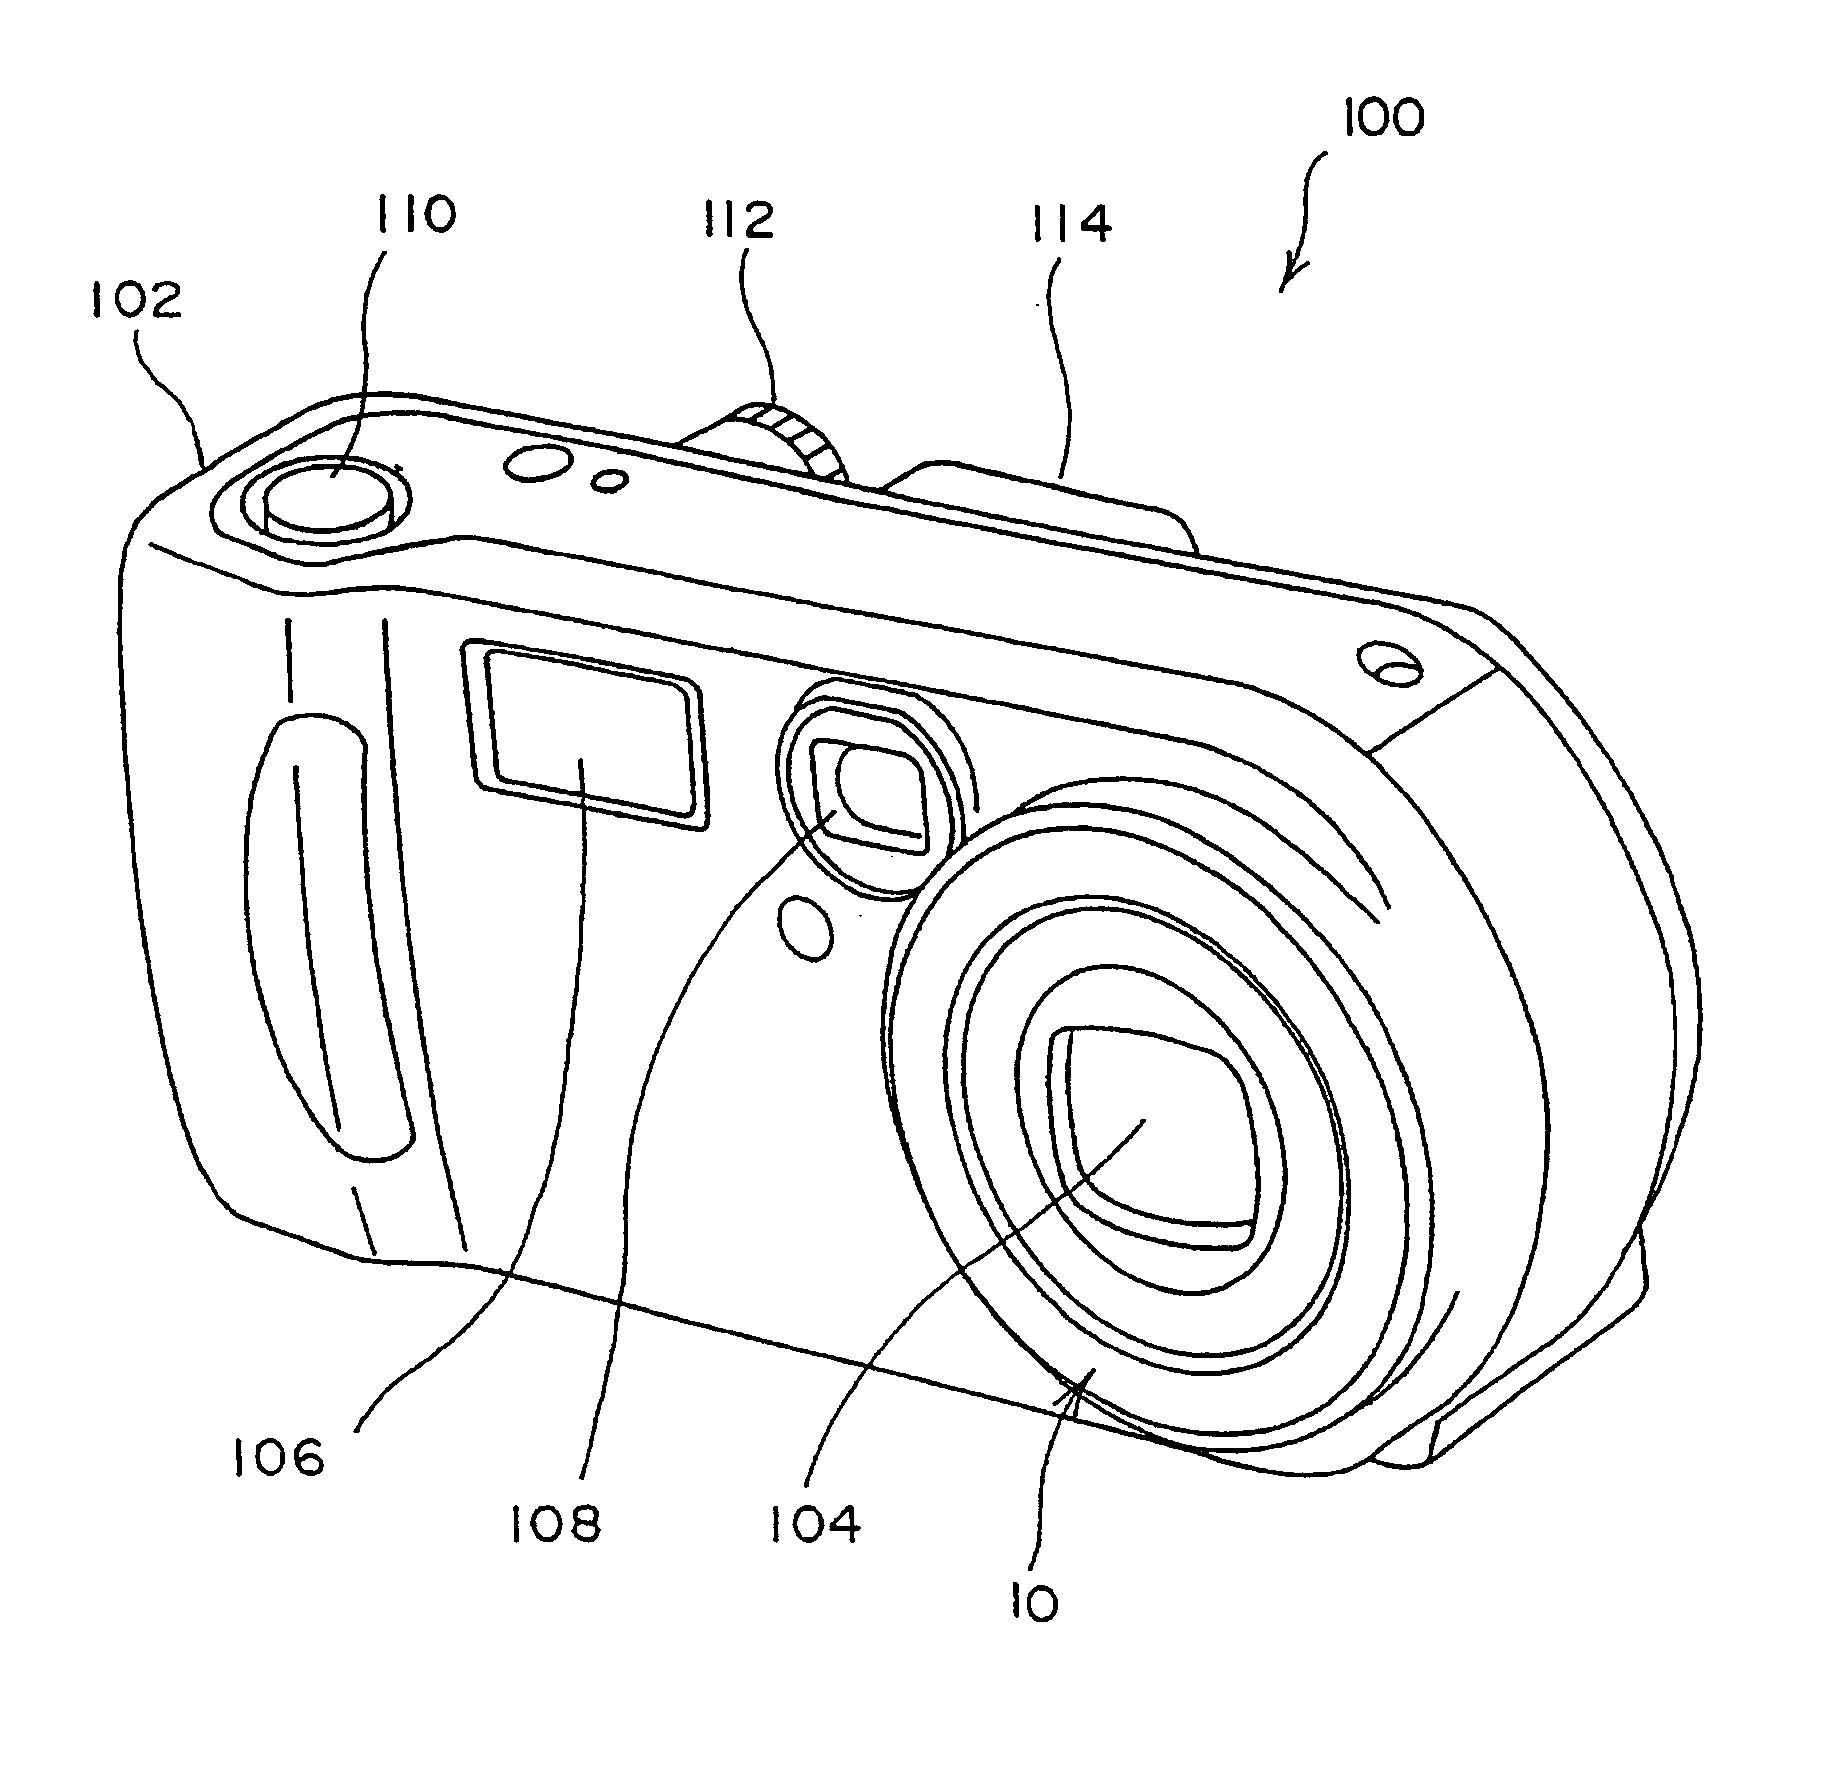 Collapsible lens barrel and imaging apparatus